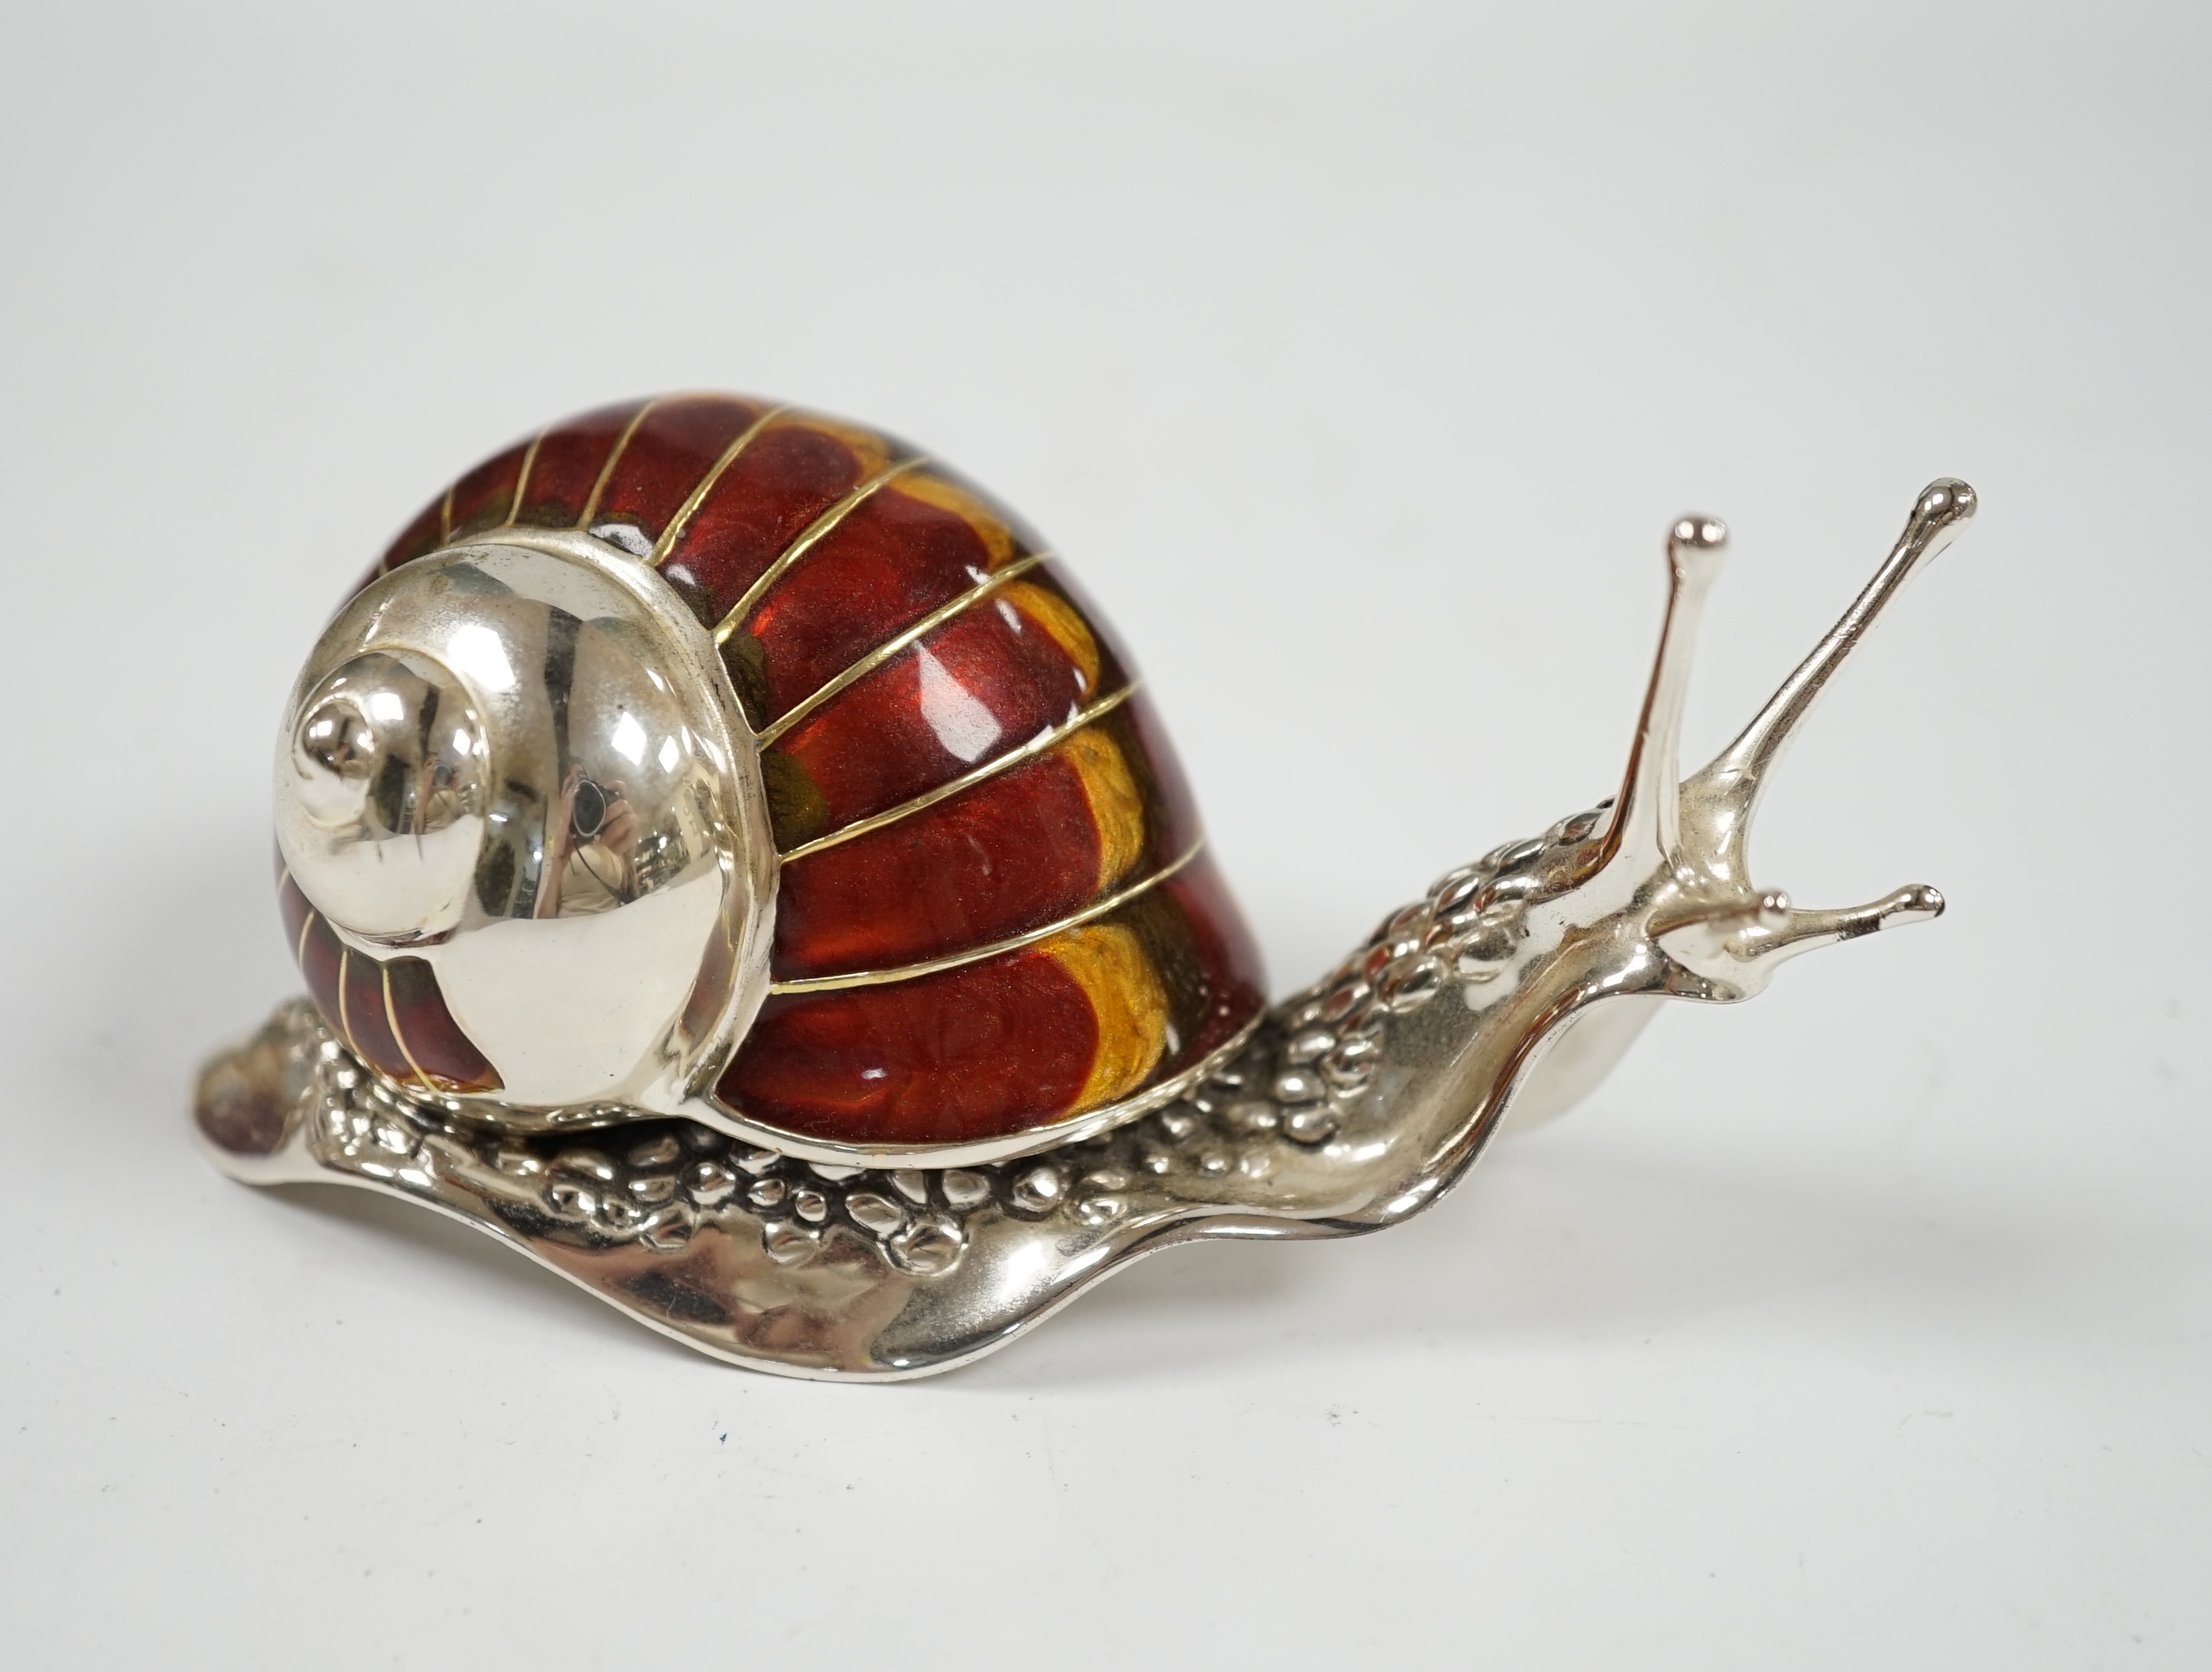 A Saturno silver and enamel model of a snail, by Francis Howard, length 10cm, gross weight 5oz. Condition - good